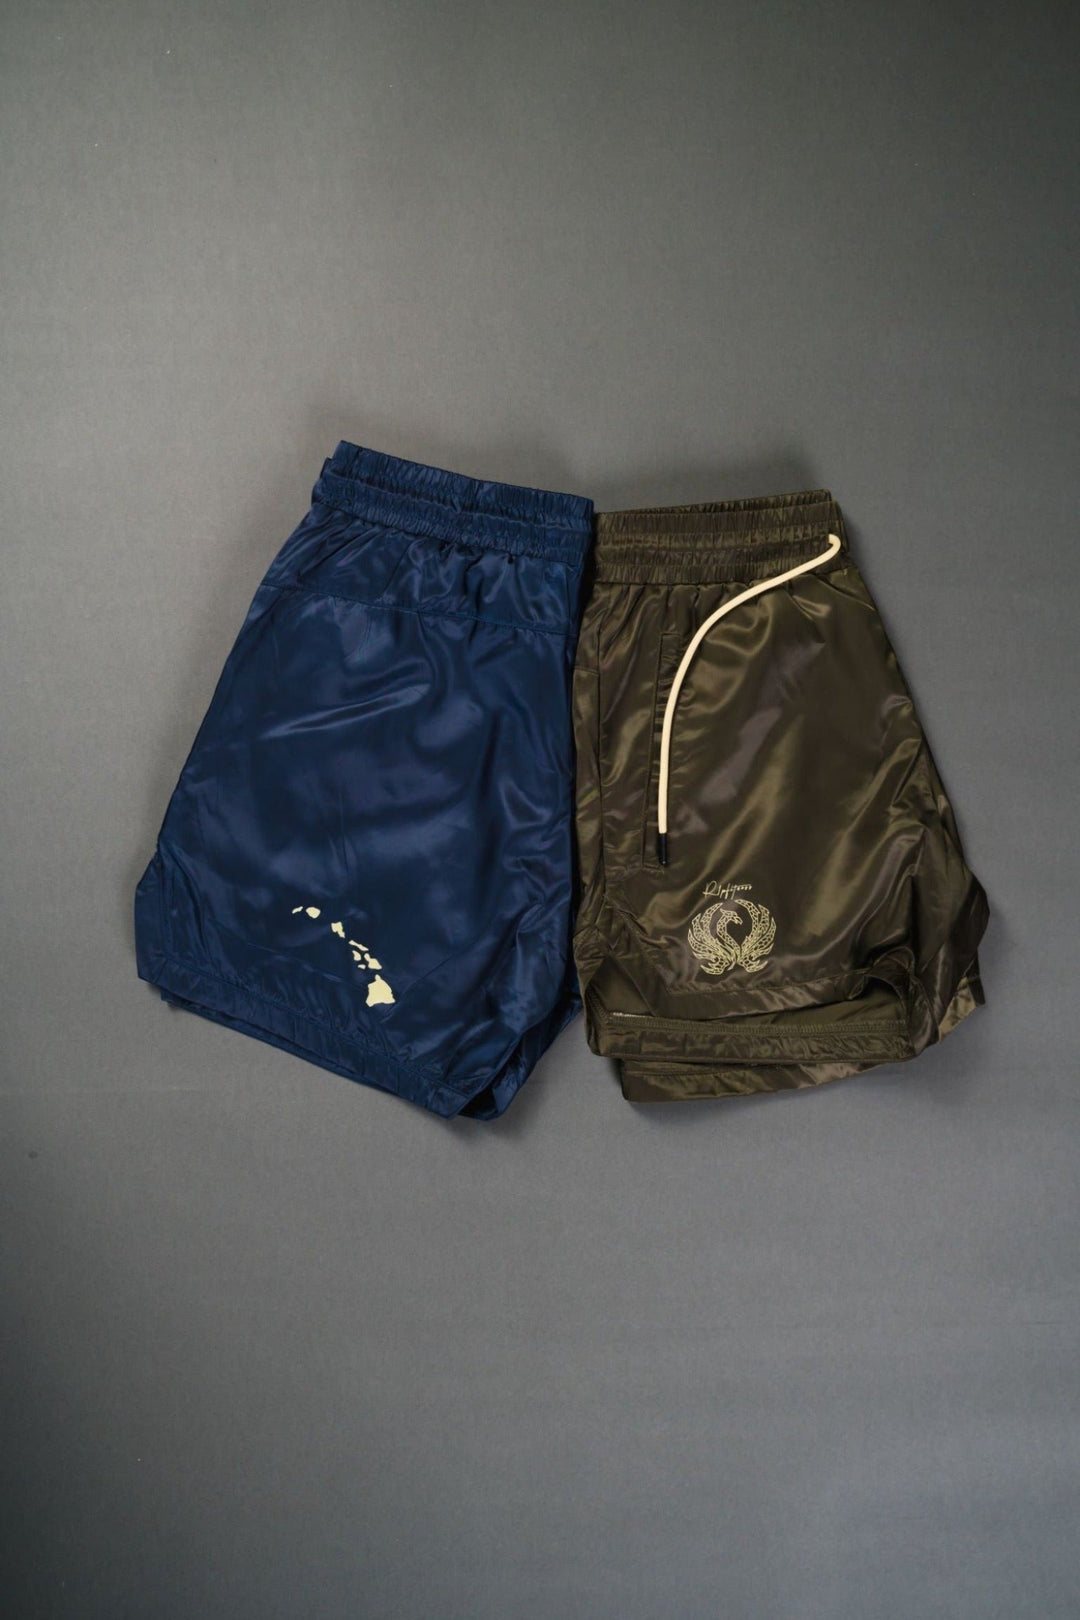 Licensed To Train Tactical Shorts 2.0